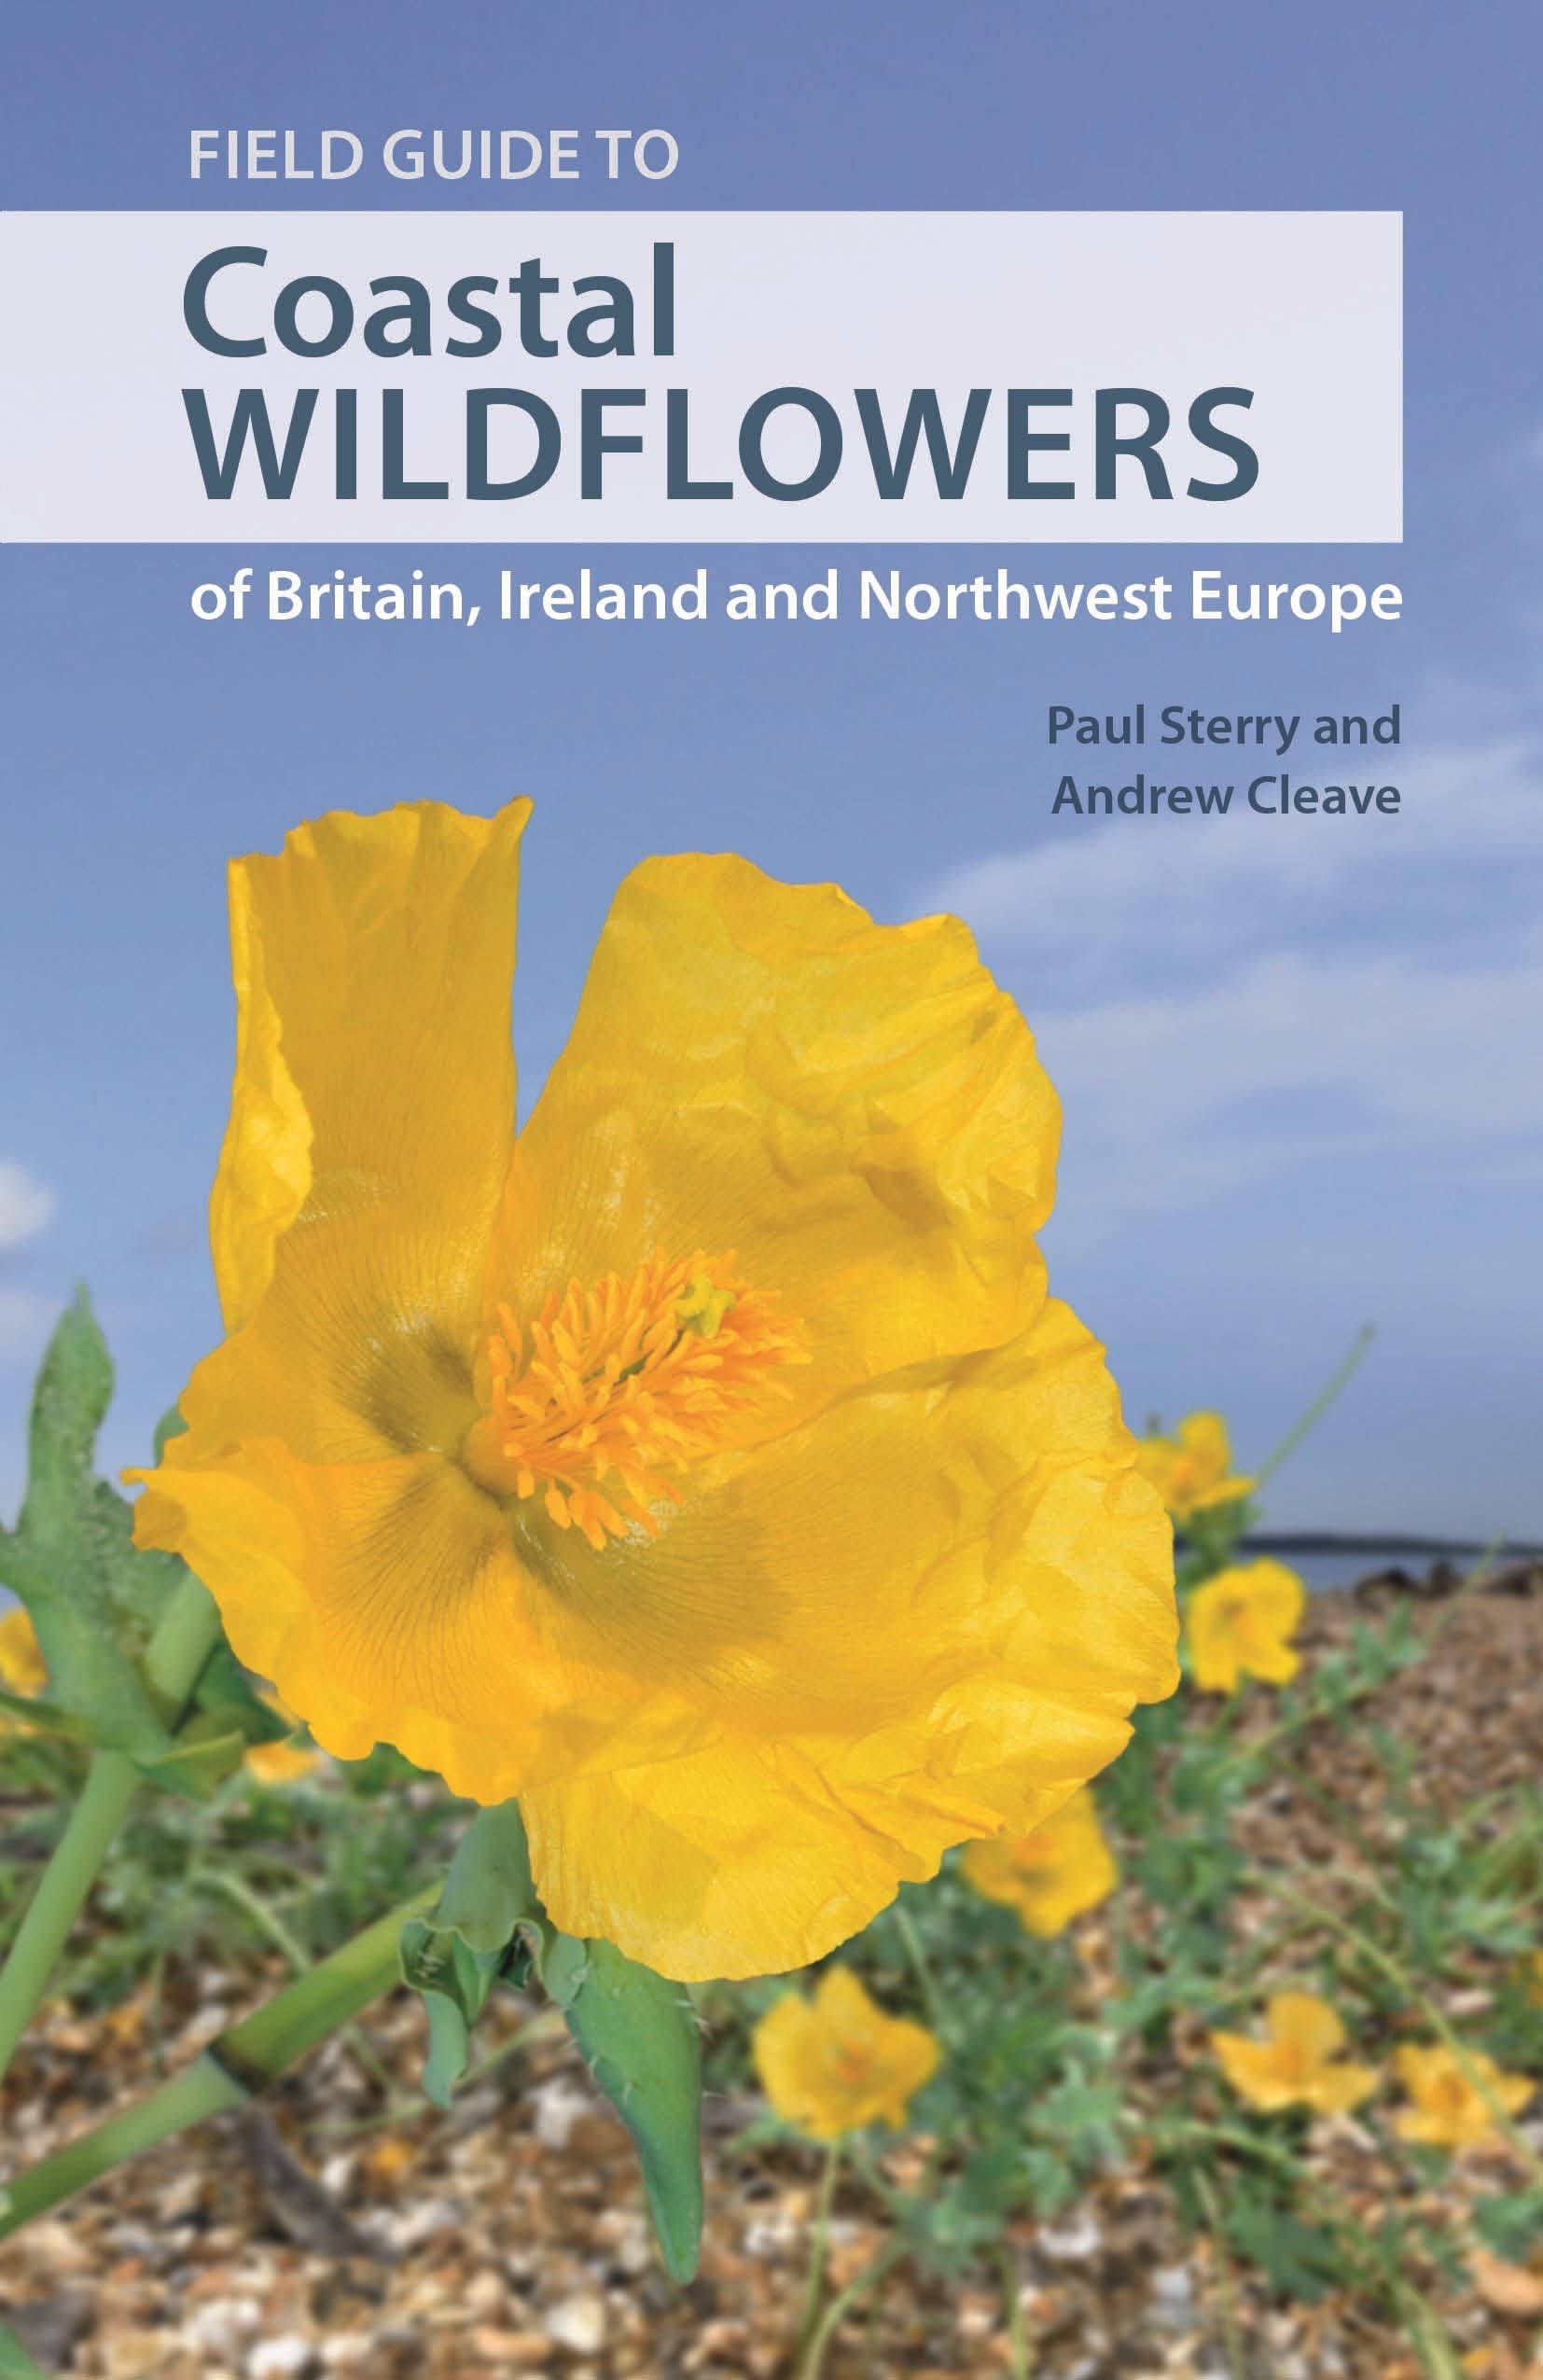 Field Guide to Coastal Wildflowers of Britain, Ireland and Northwest Europe [Book]